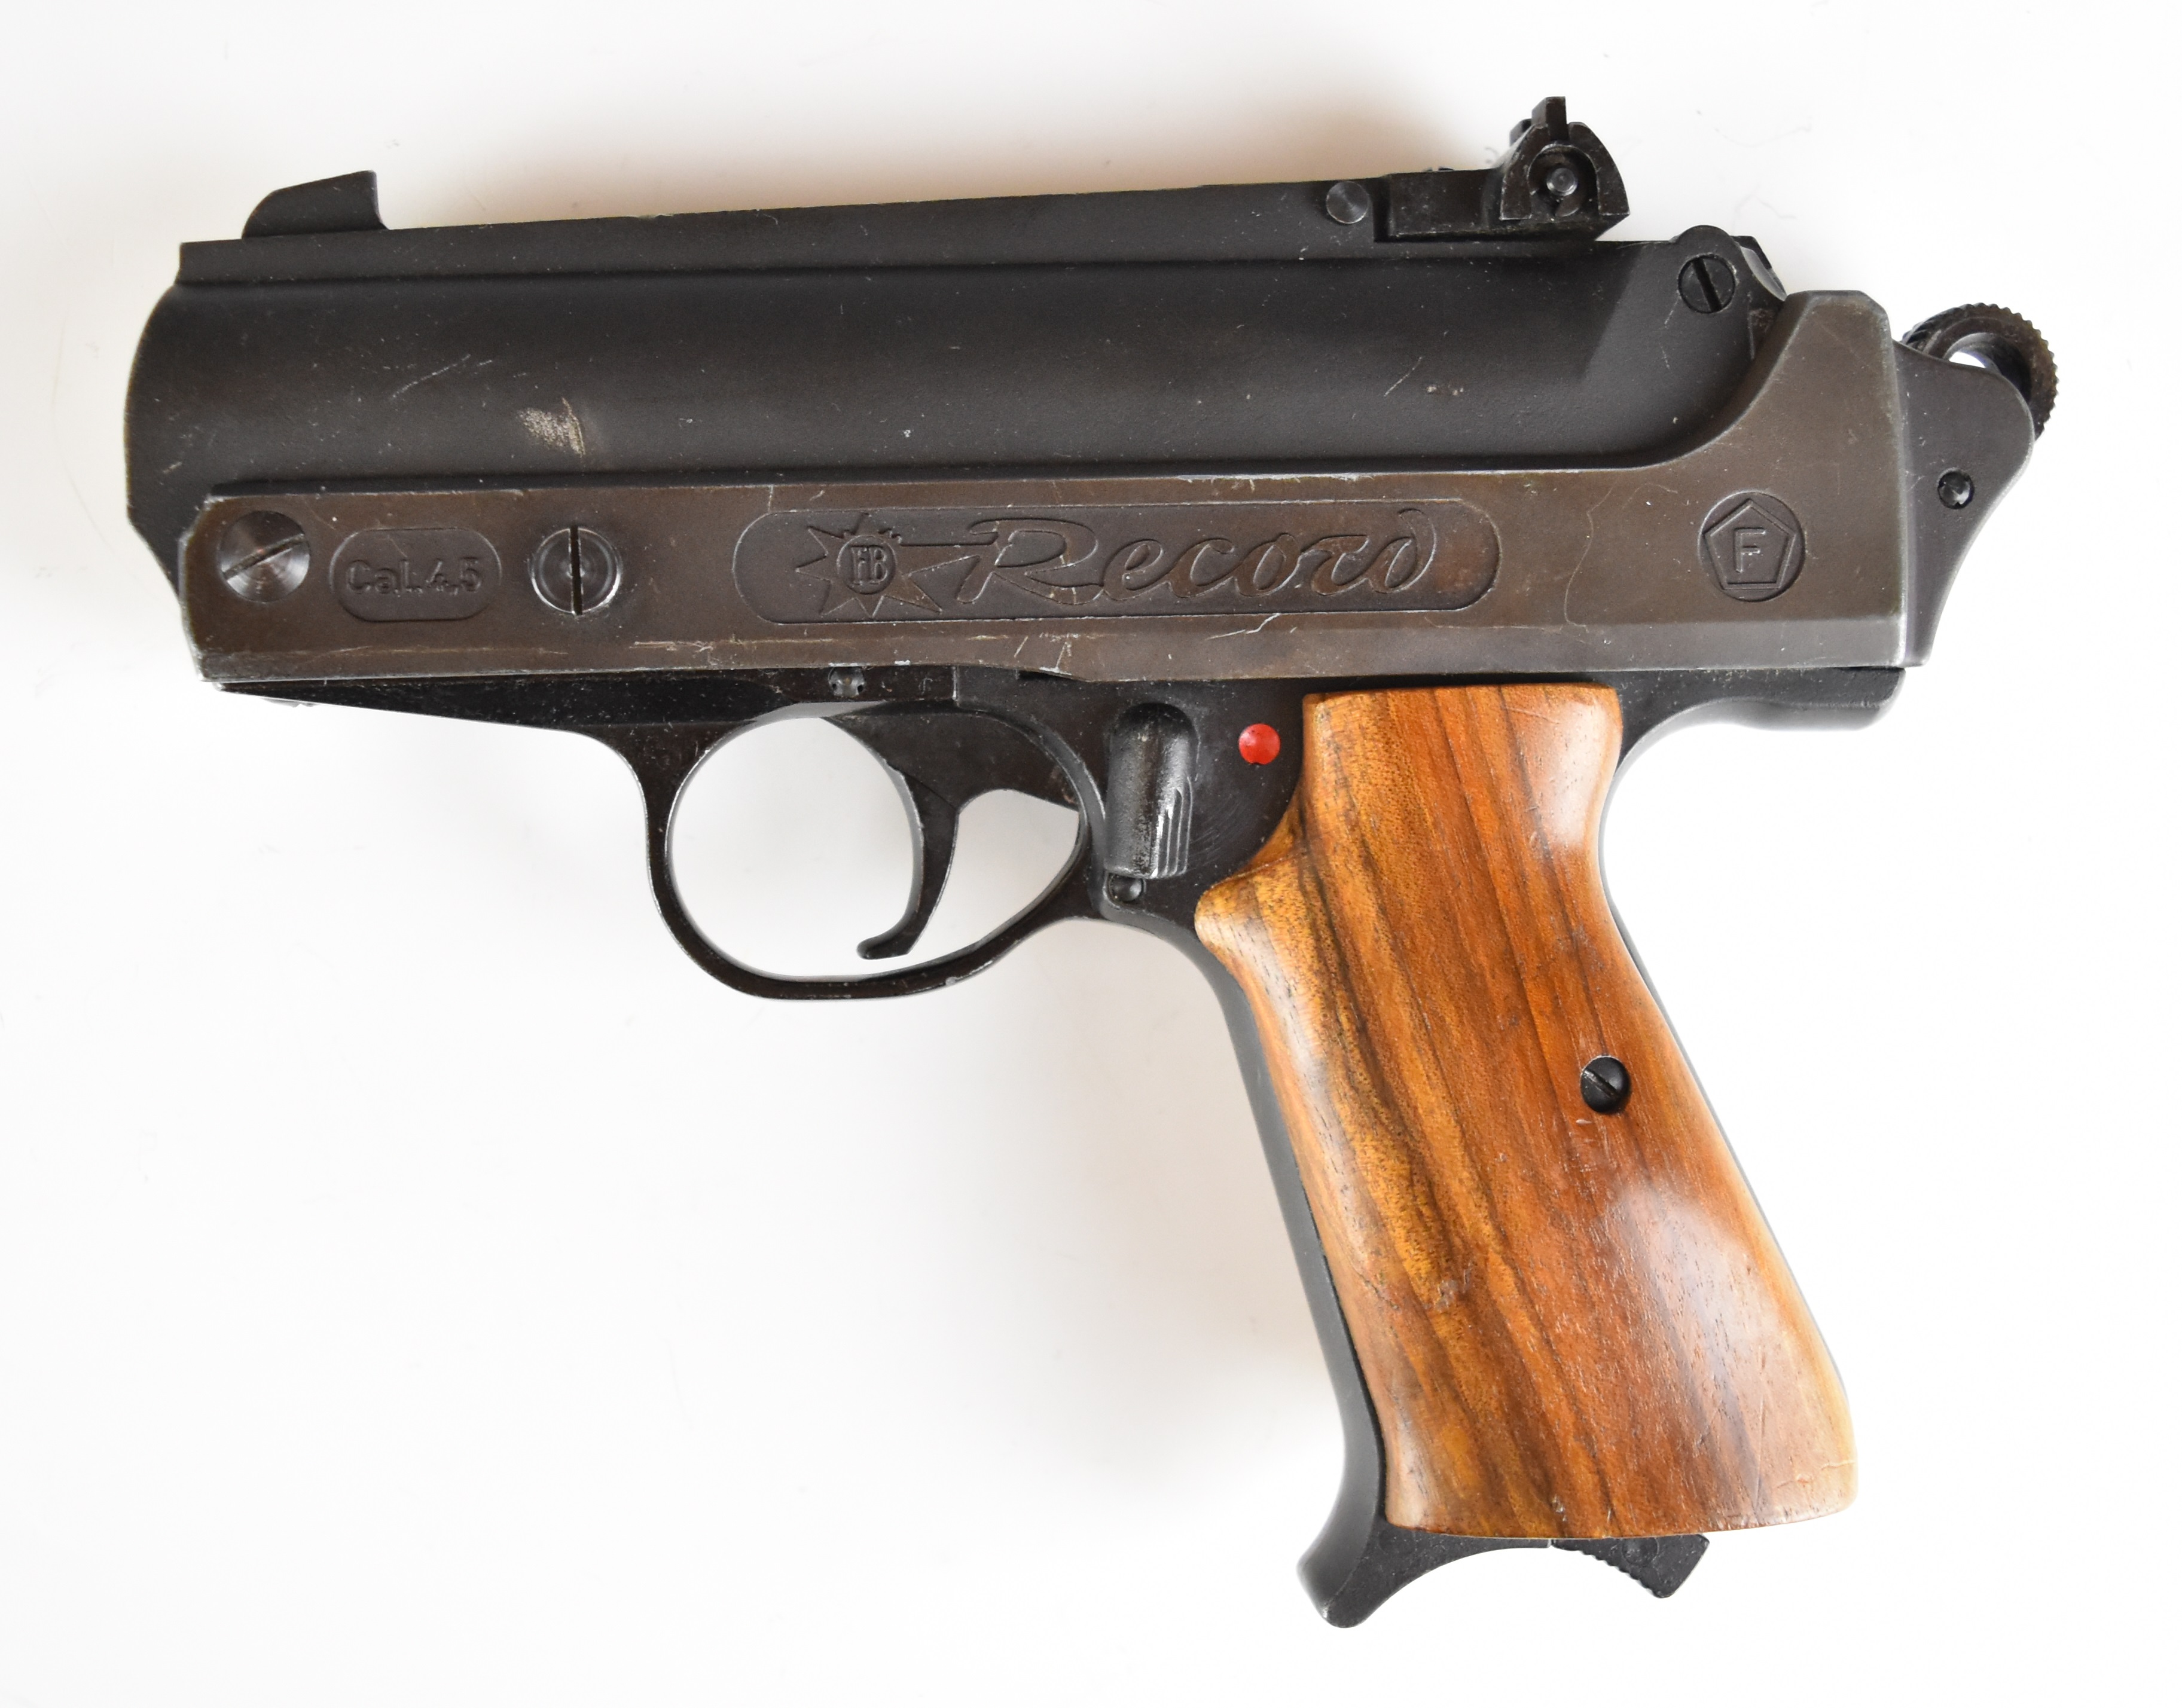 FB Record Jumbo .177 air pistol with shaped wooden grips and adjustable sights, serial number 10792. - Image 2 of 12